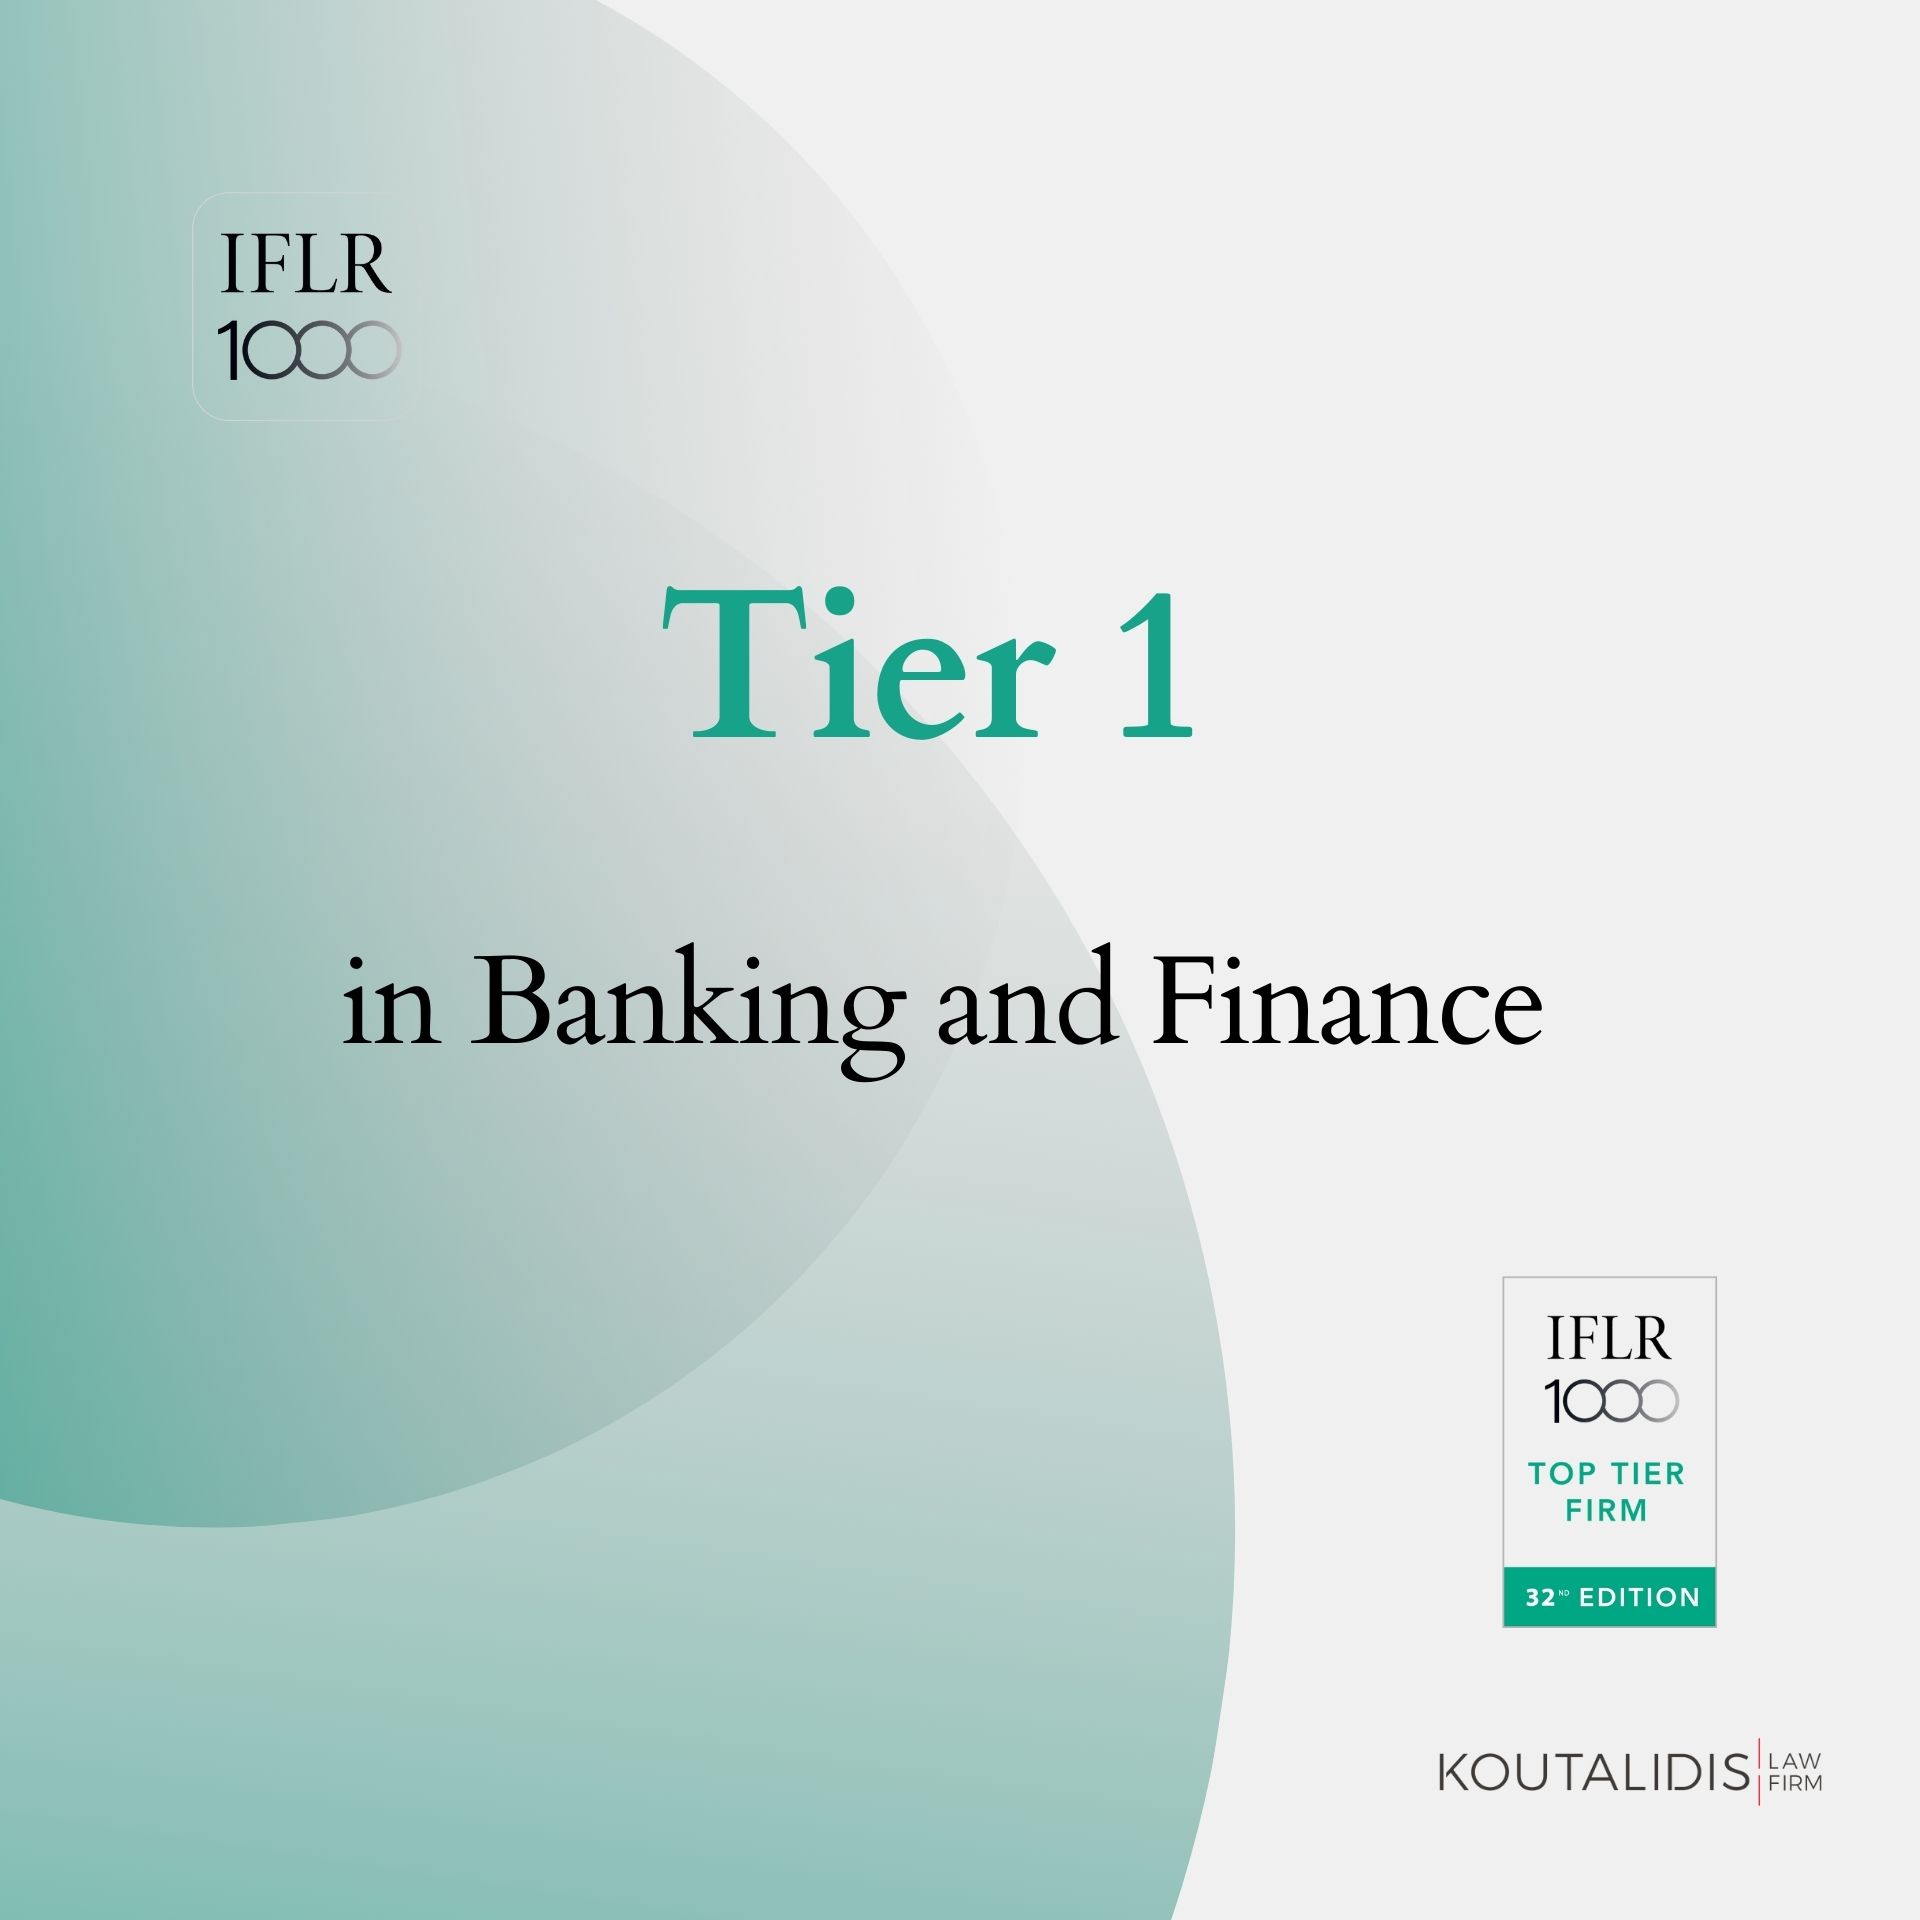 Koutalidis ranks Top Tier in IFLR1000 Banking and Finance